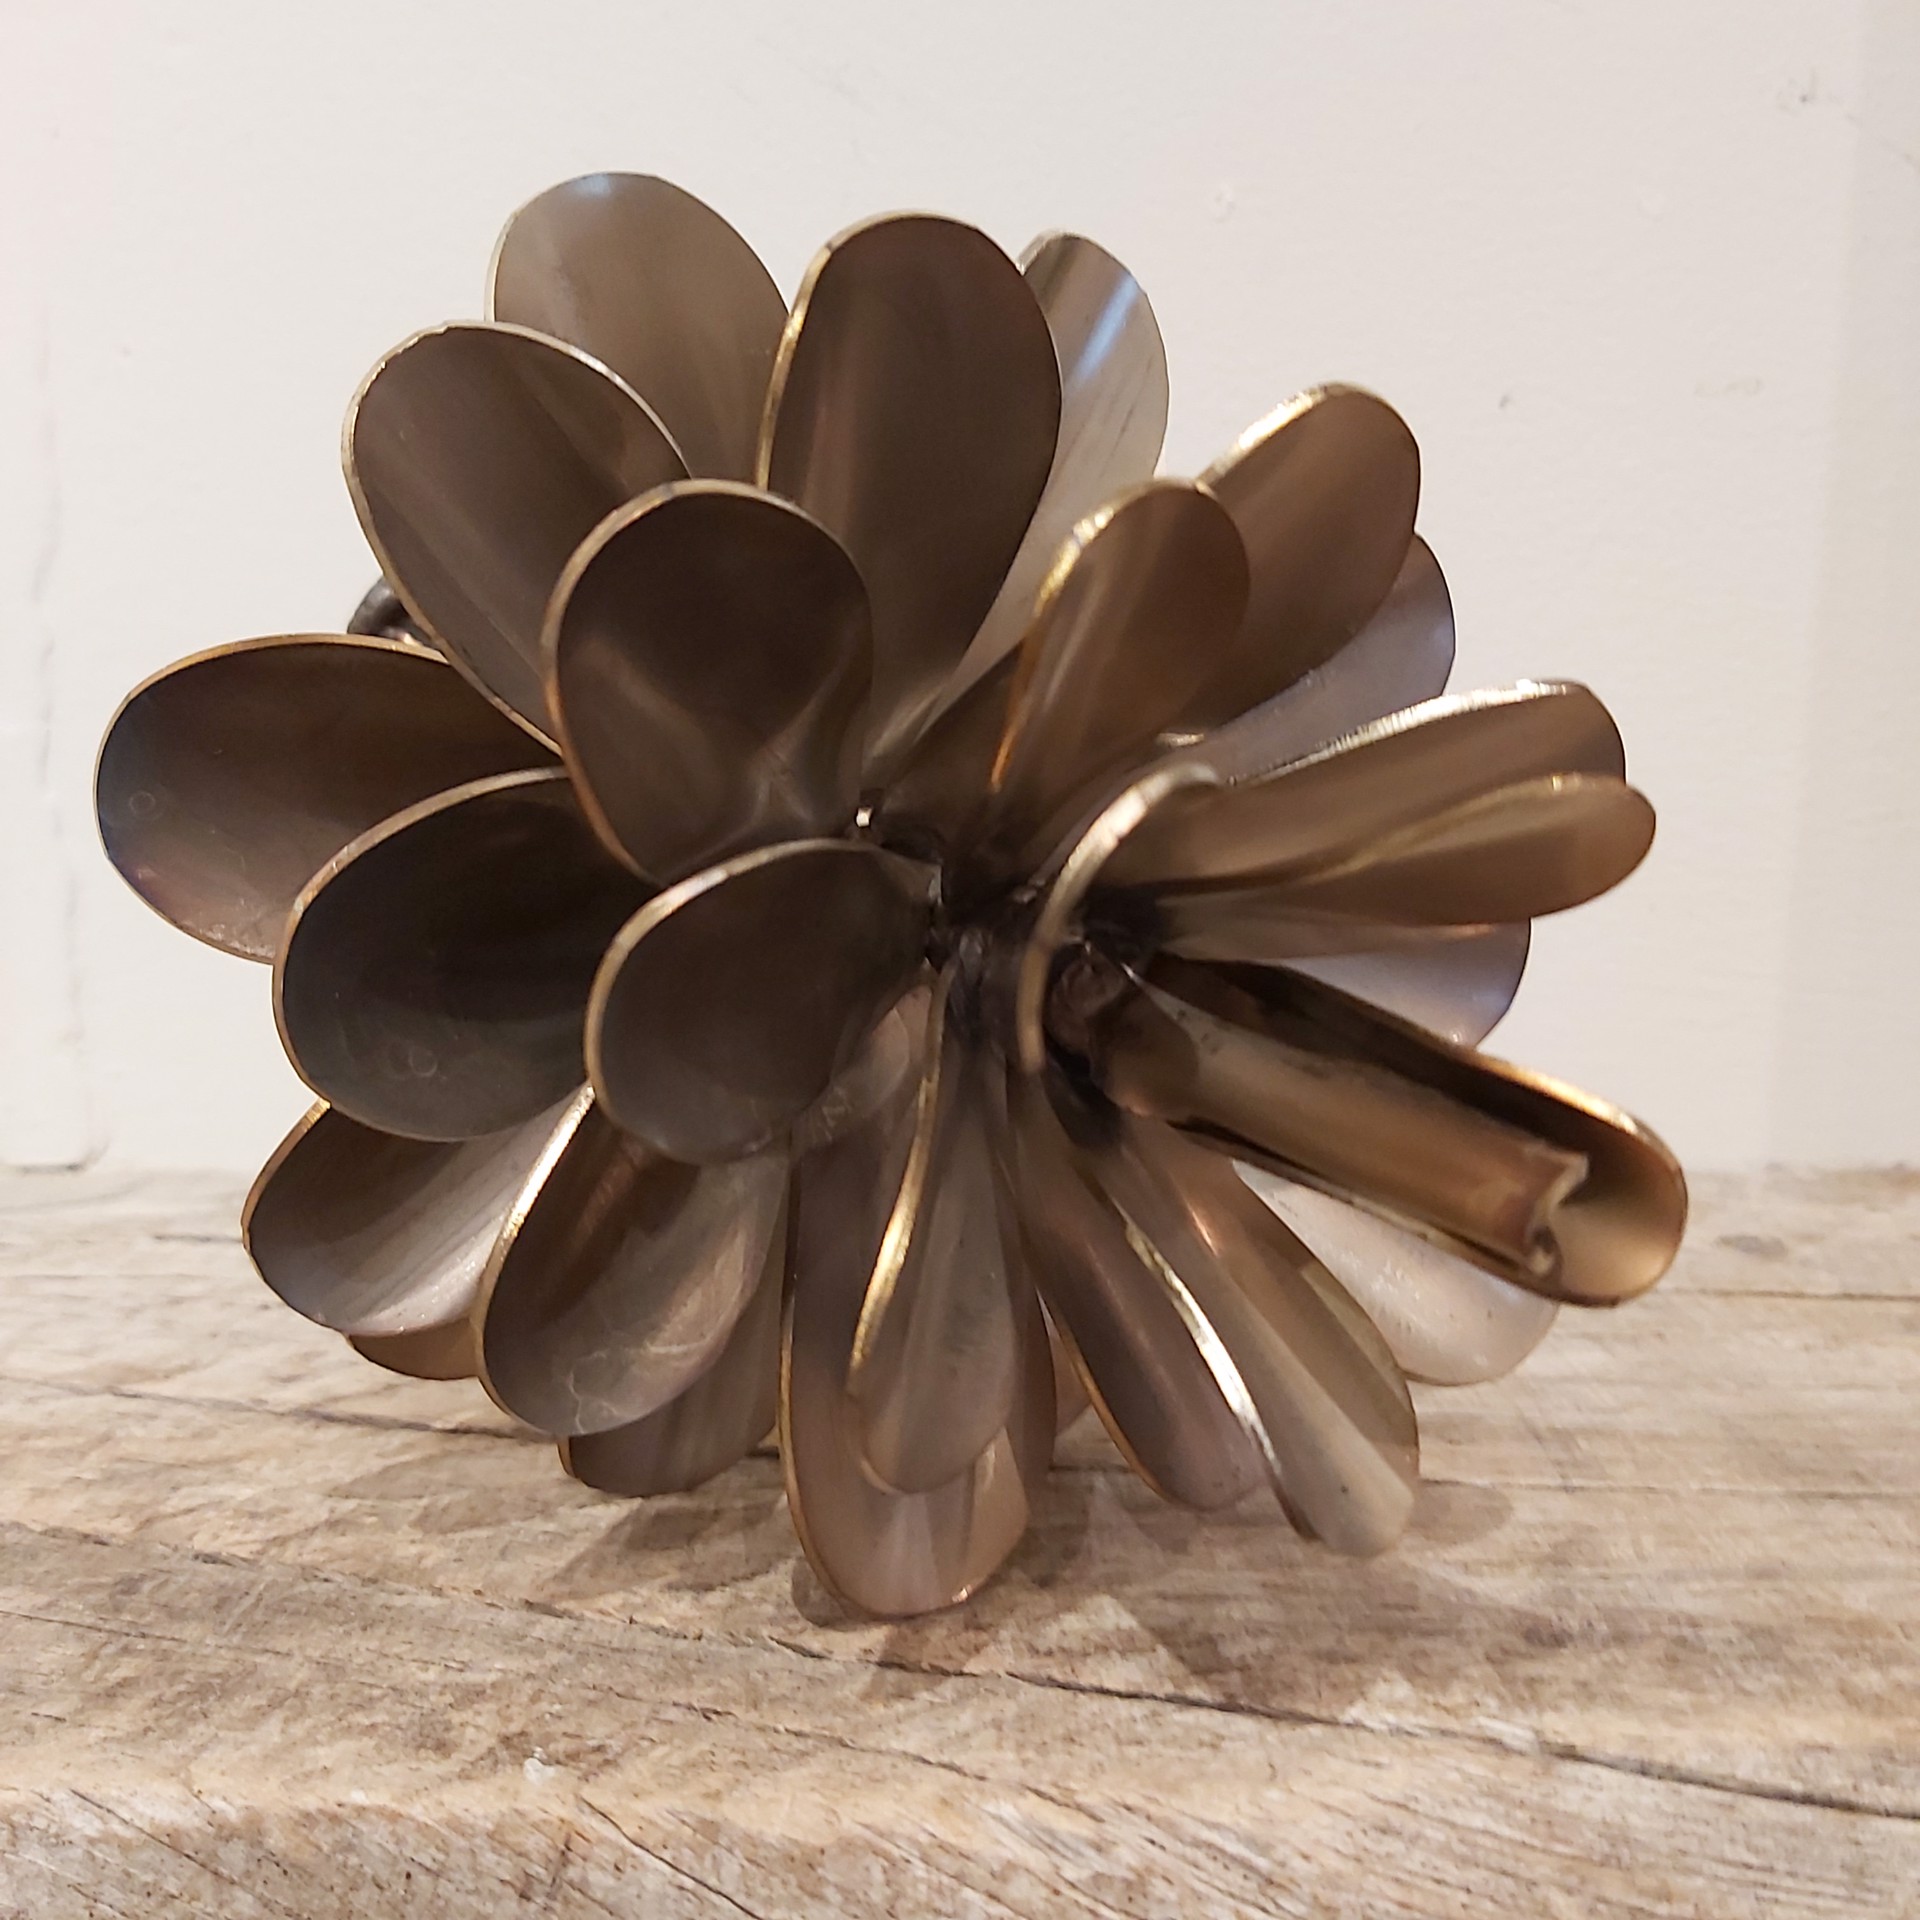 Stainless Steel Pine Cone gold finish 20-456 by Floyd Elzinga